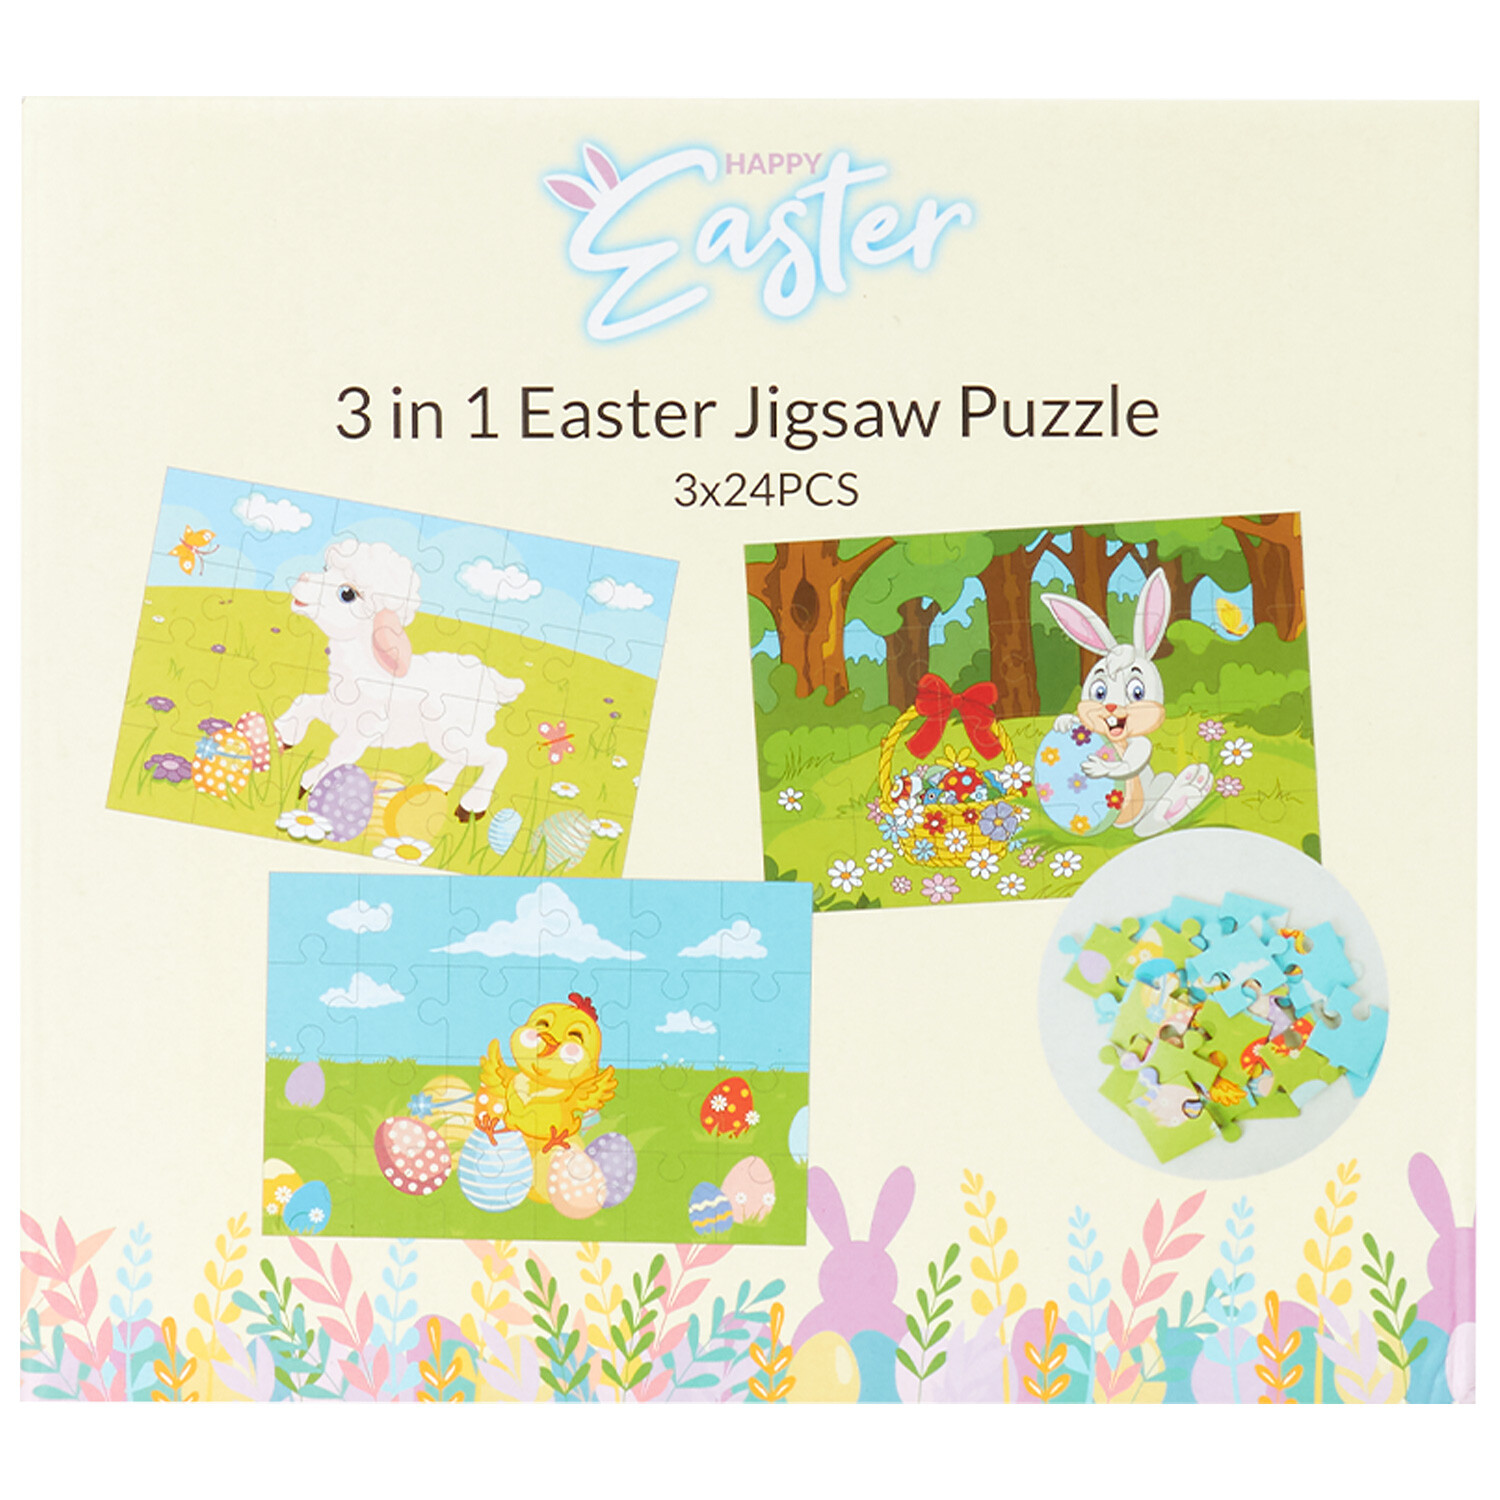 3-in-1 Easter Jigsaw Puzzle Image 1